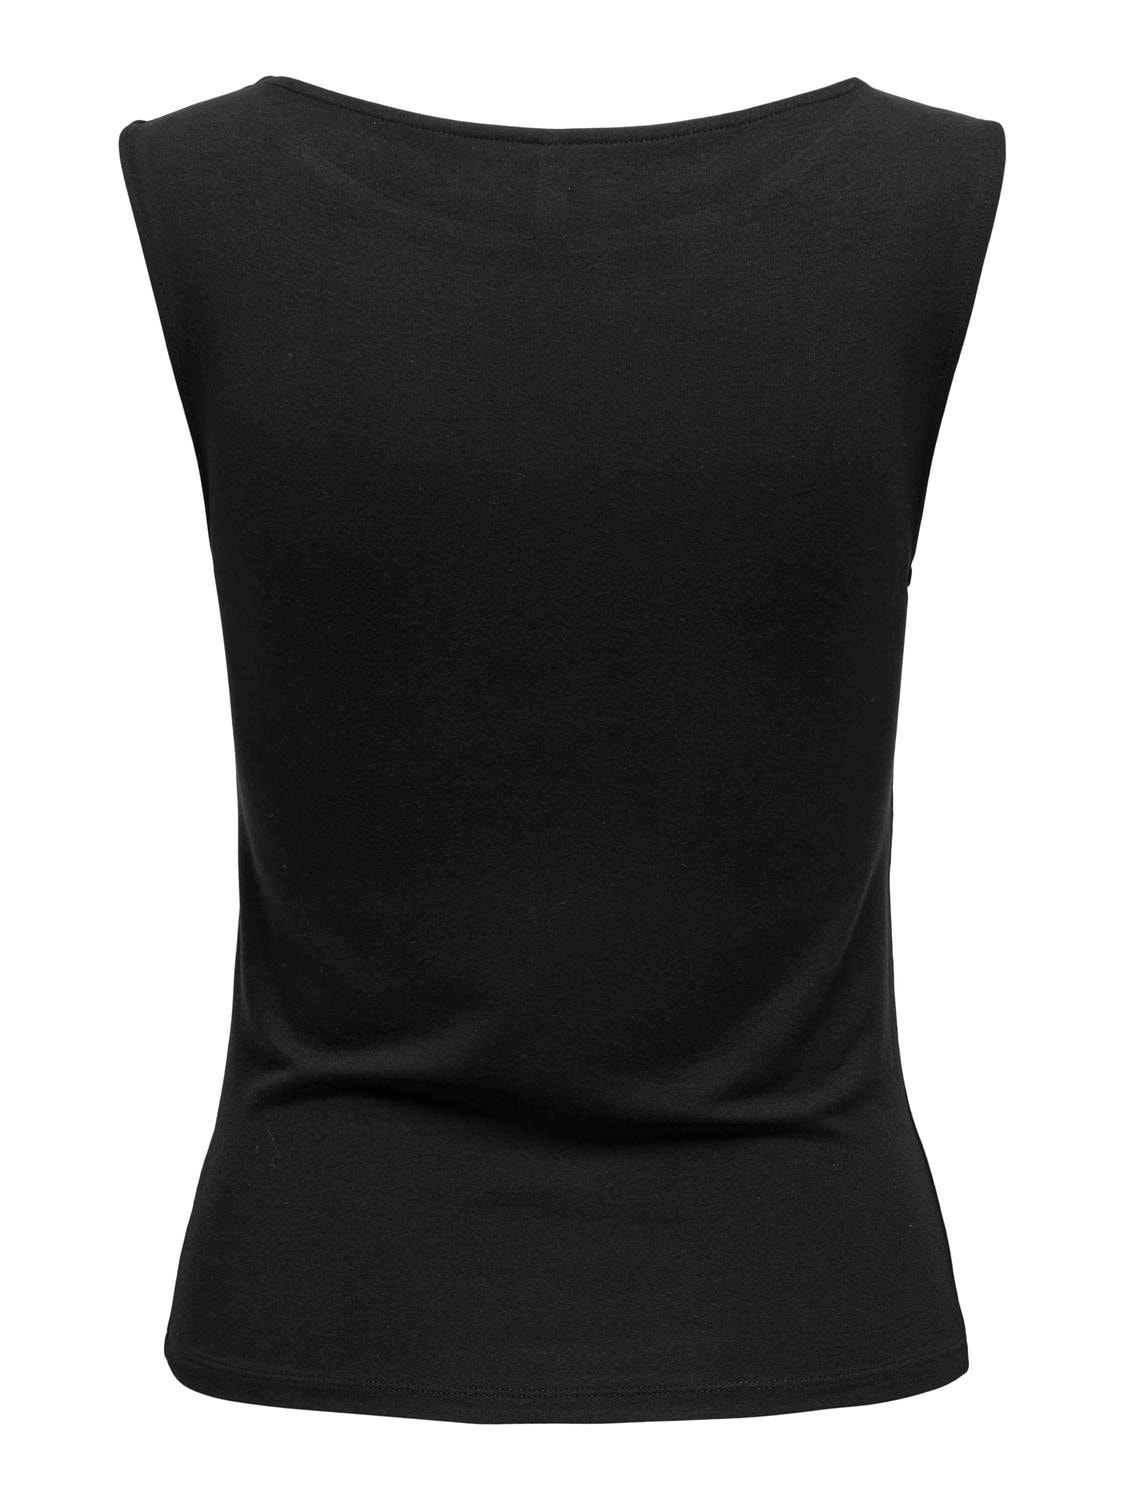 ONLY Top with boat neck -Black - 15336196